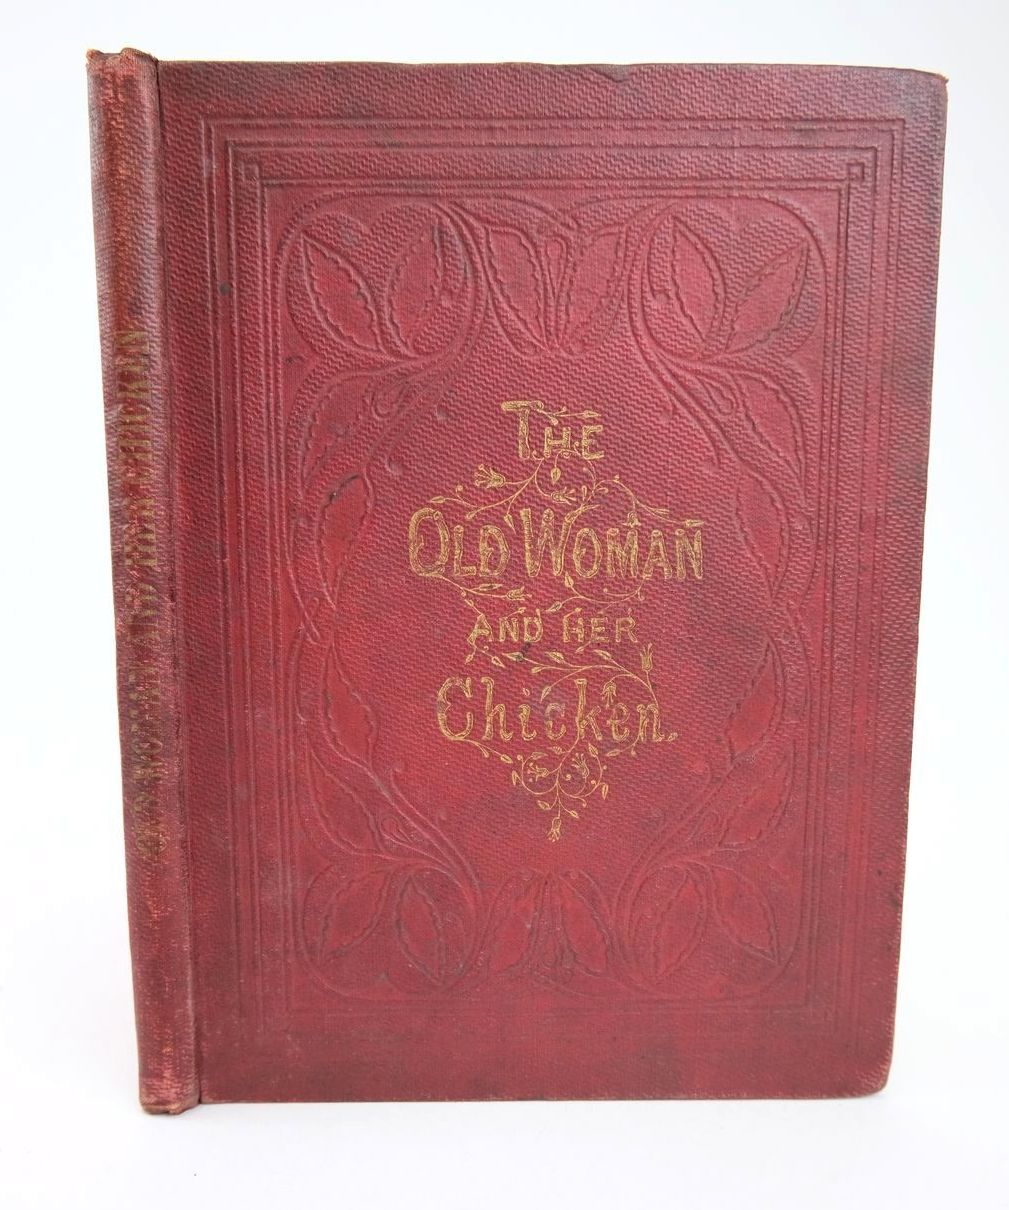 Photo of THE OLD WOMAN AND HER CHICKEN published by Darton &amp; Co. (STOCK CODE: 1318702)  for sale by Stella & Rose's Books